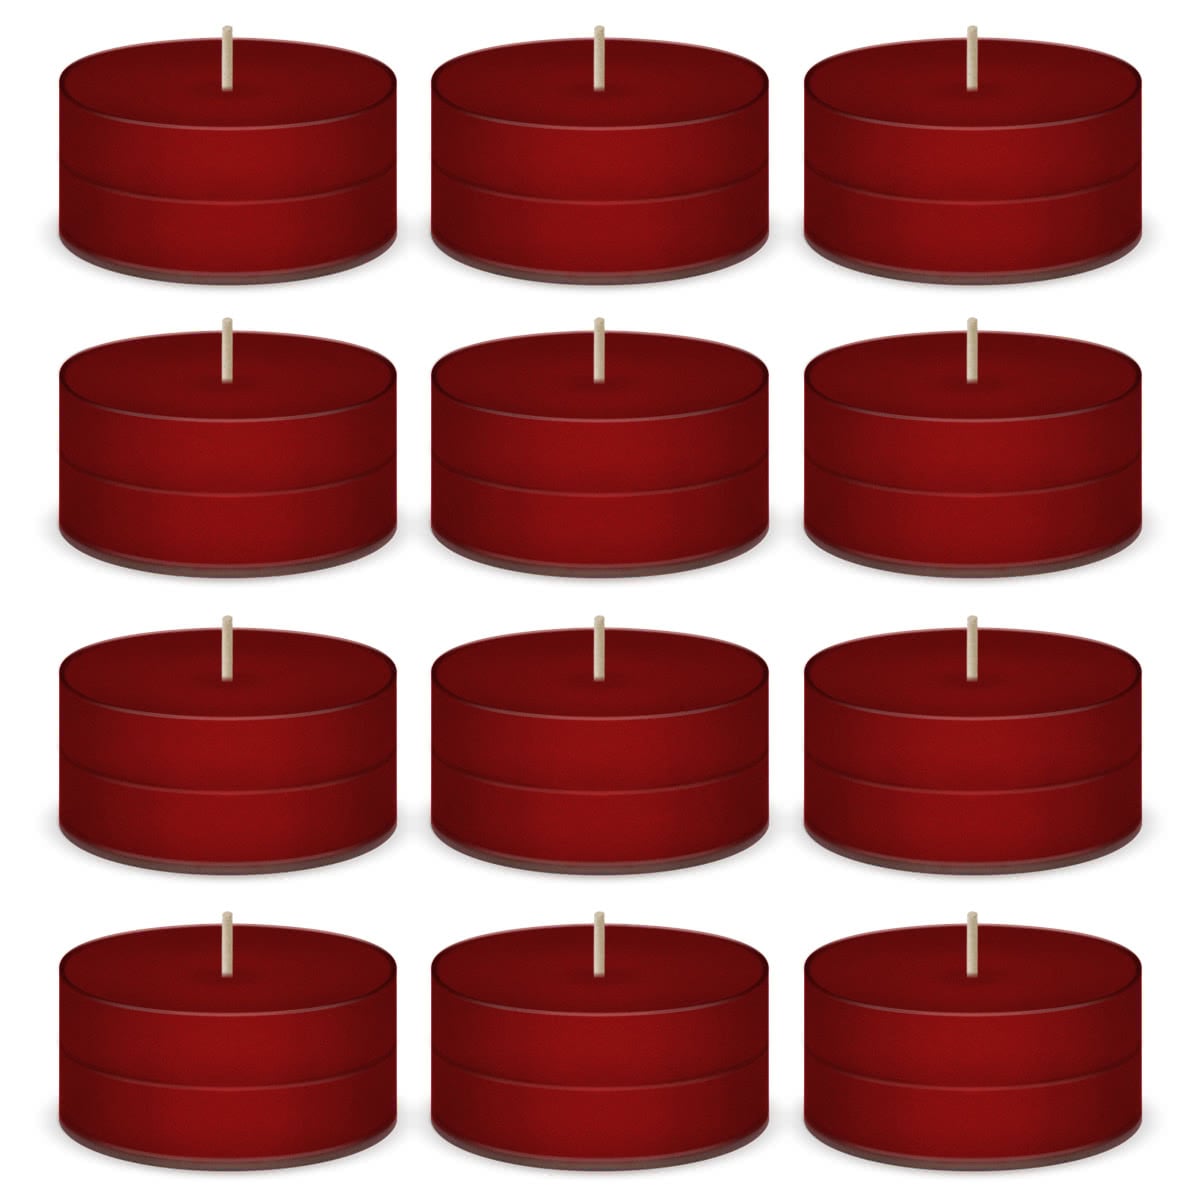 Christmas Essence Scented Tea Lights Candles by American Candle - 12 Pack